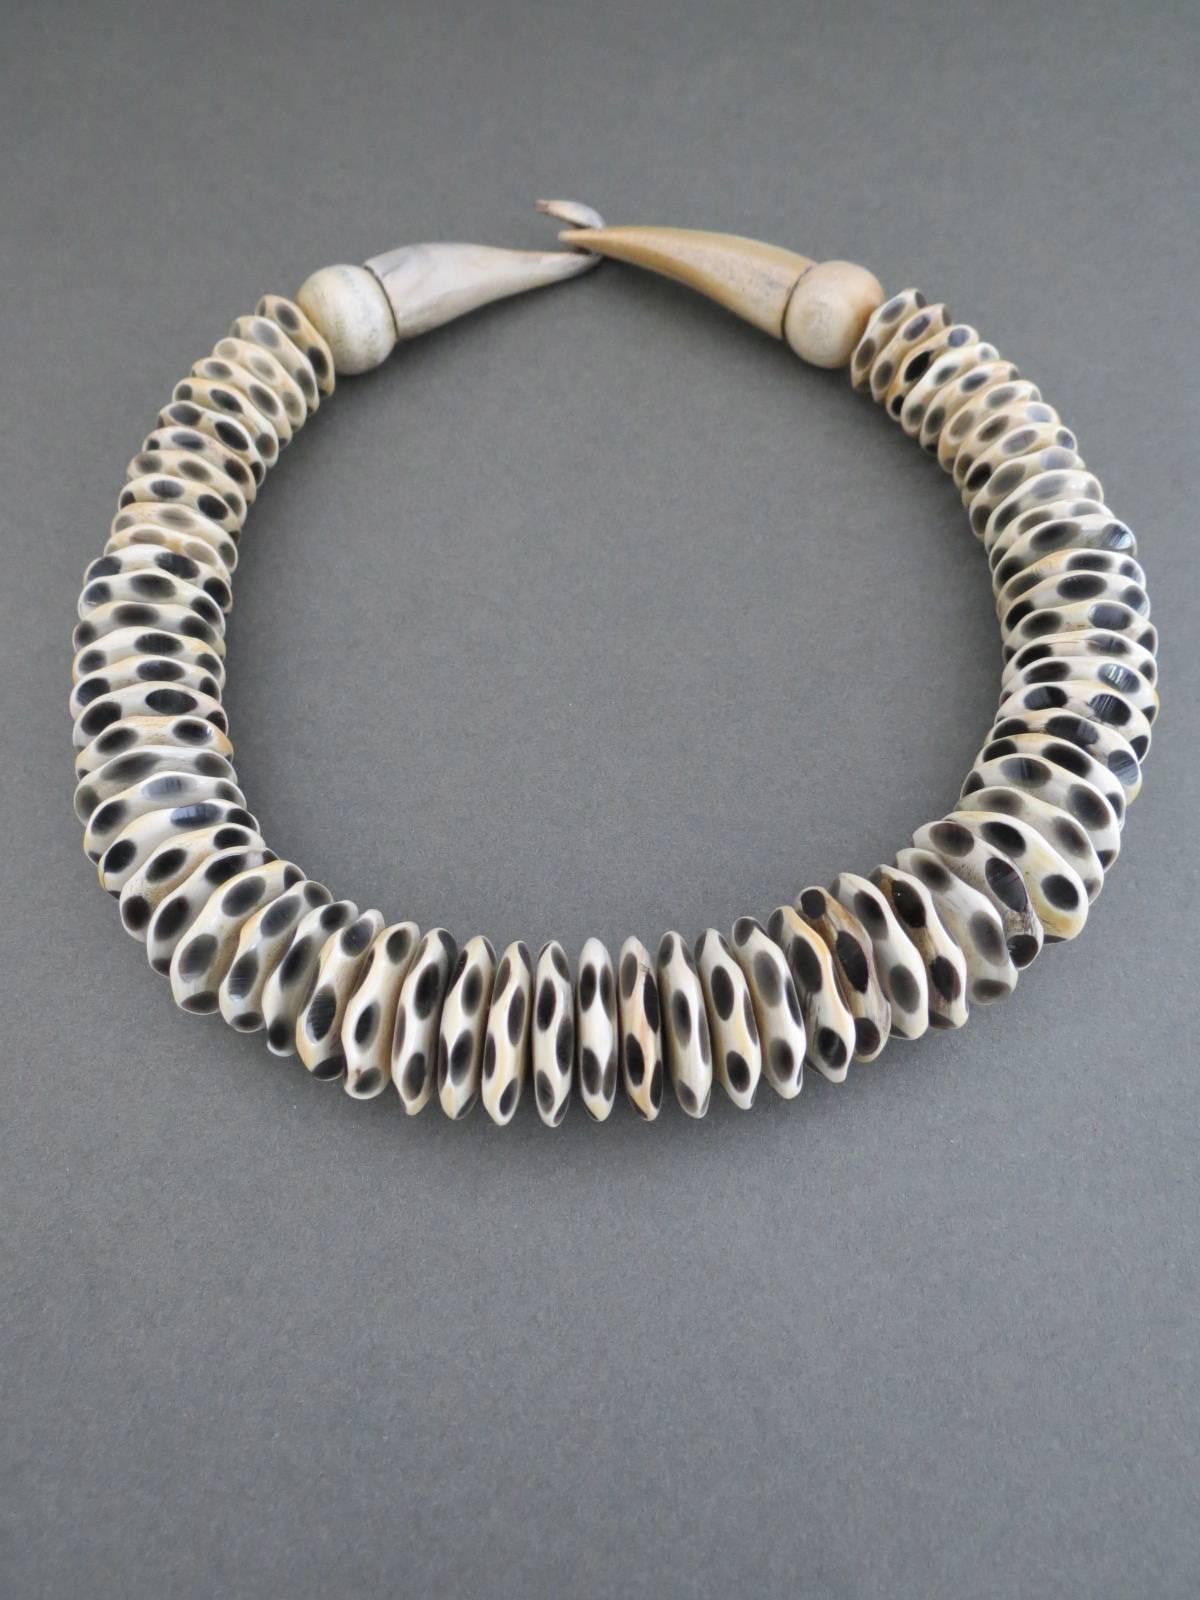 This is lovely Danish Monies necklace designed by Gerda Lynggaard .
Item Specifics
Length: 53cm (approx 20.50